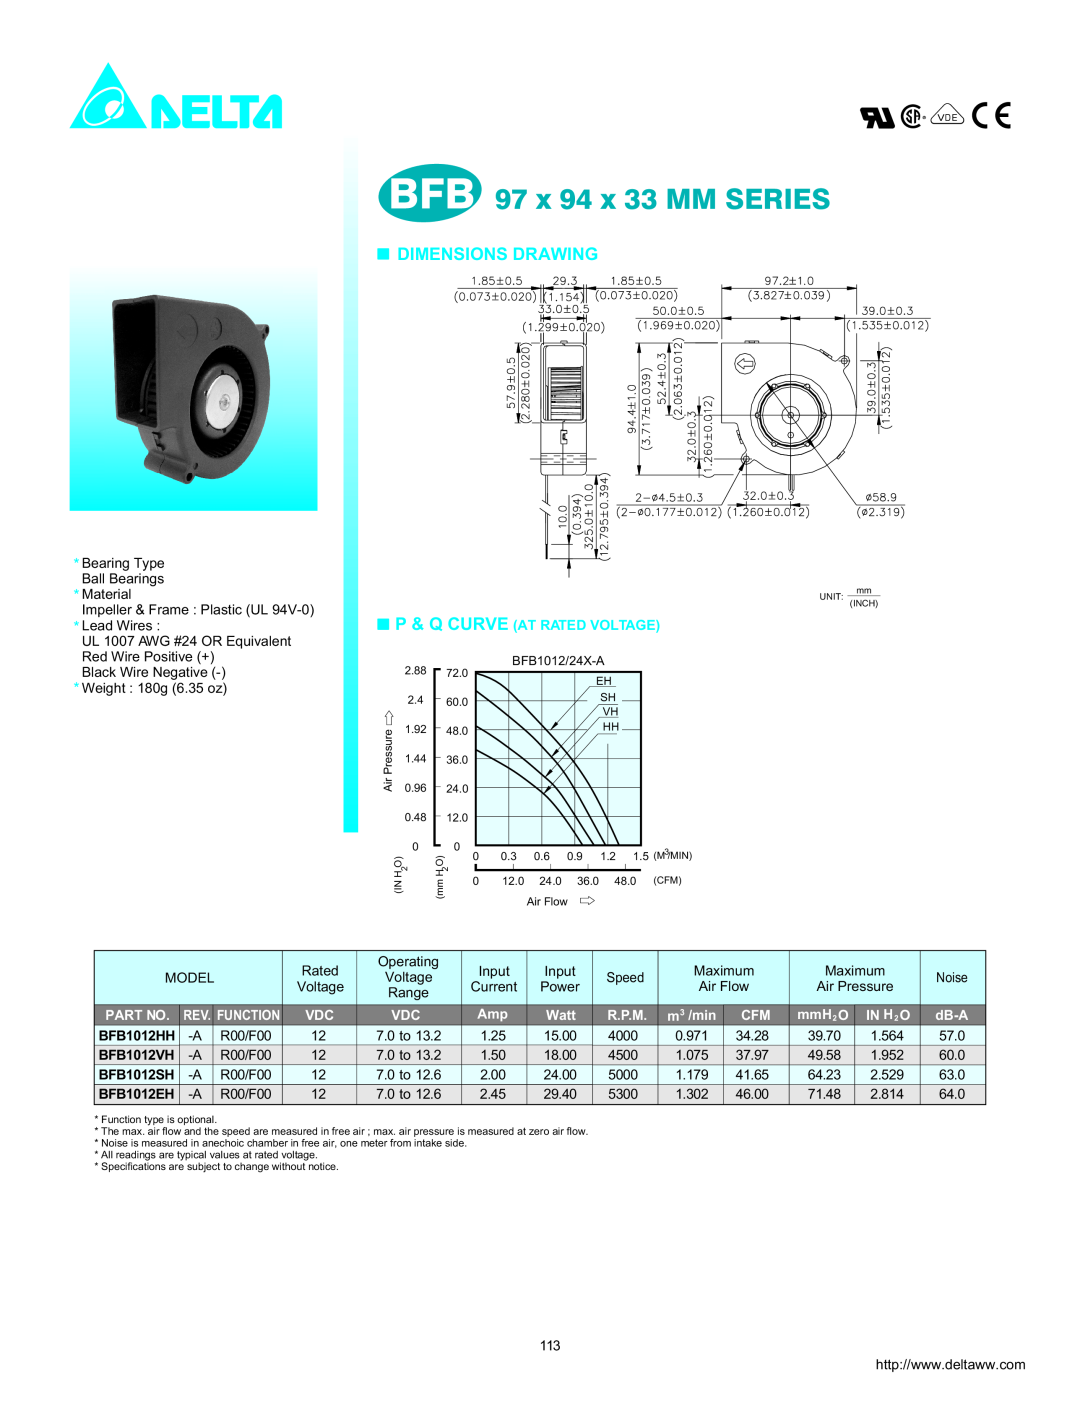 Delta Electronics BFB1012M R.P.M, BFB1012VH, BFB1012SH, BFB1012EH, BFB 97 x 94 x 33 MM SERIES, Dimensions Drawing, IN H2 O 